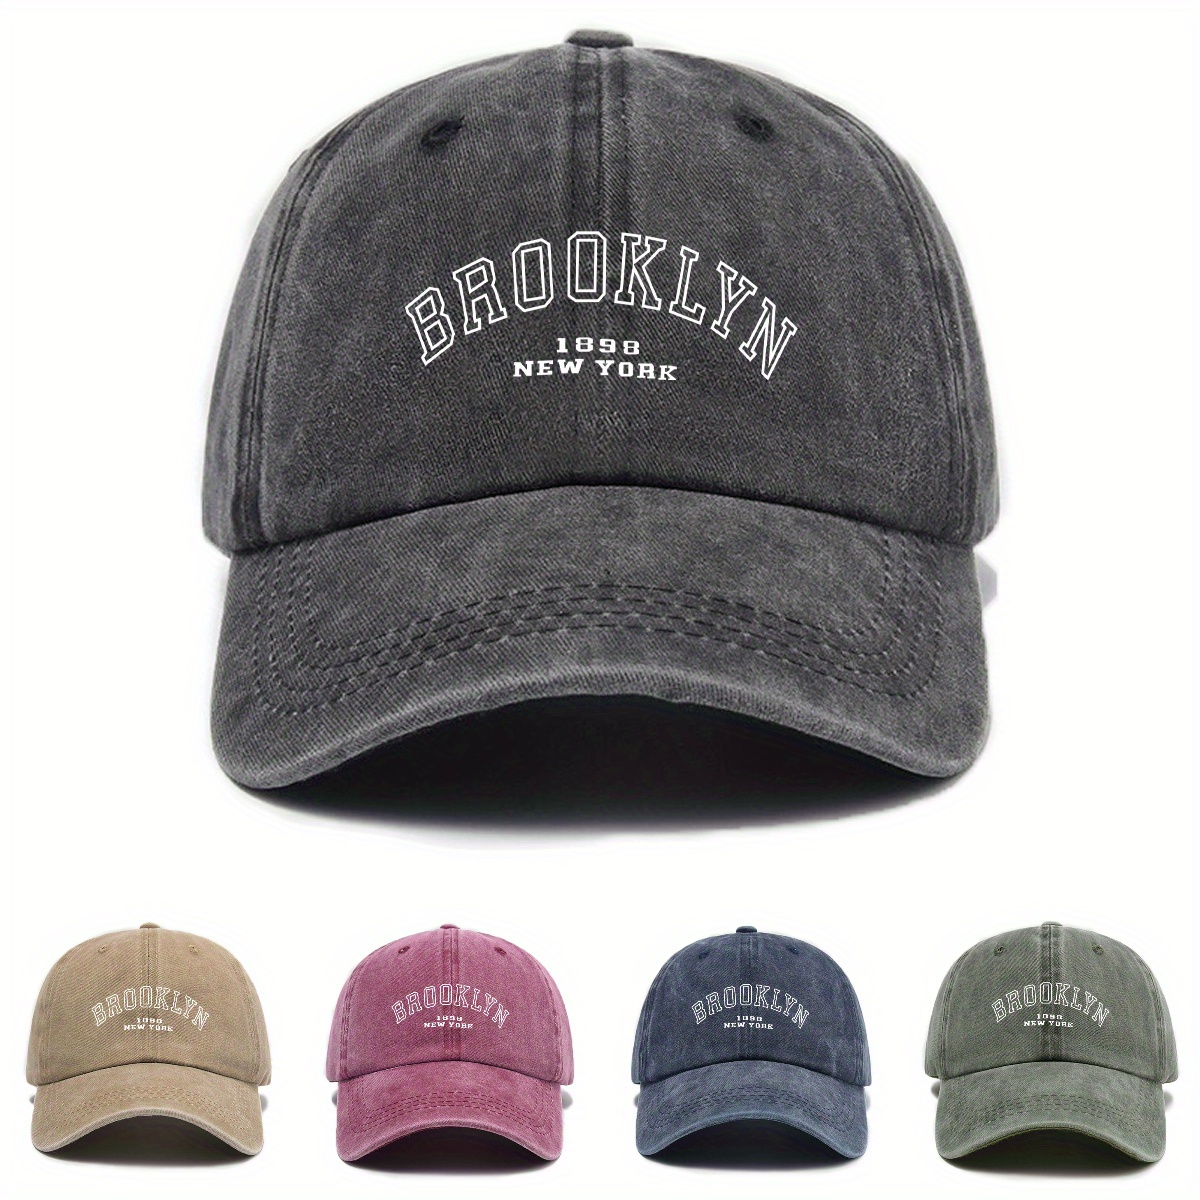 

Brooklyn 1859 New York Adjustable Baseball Cap - Woven Polyester Urban Style Cap With Sun Protection, Vintage Embroidery Design Unisex Hat